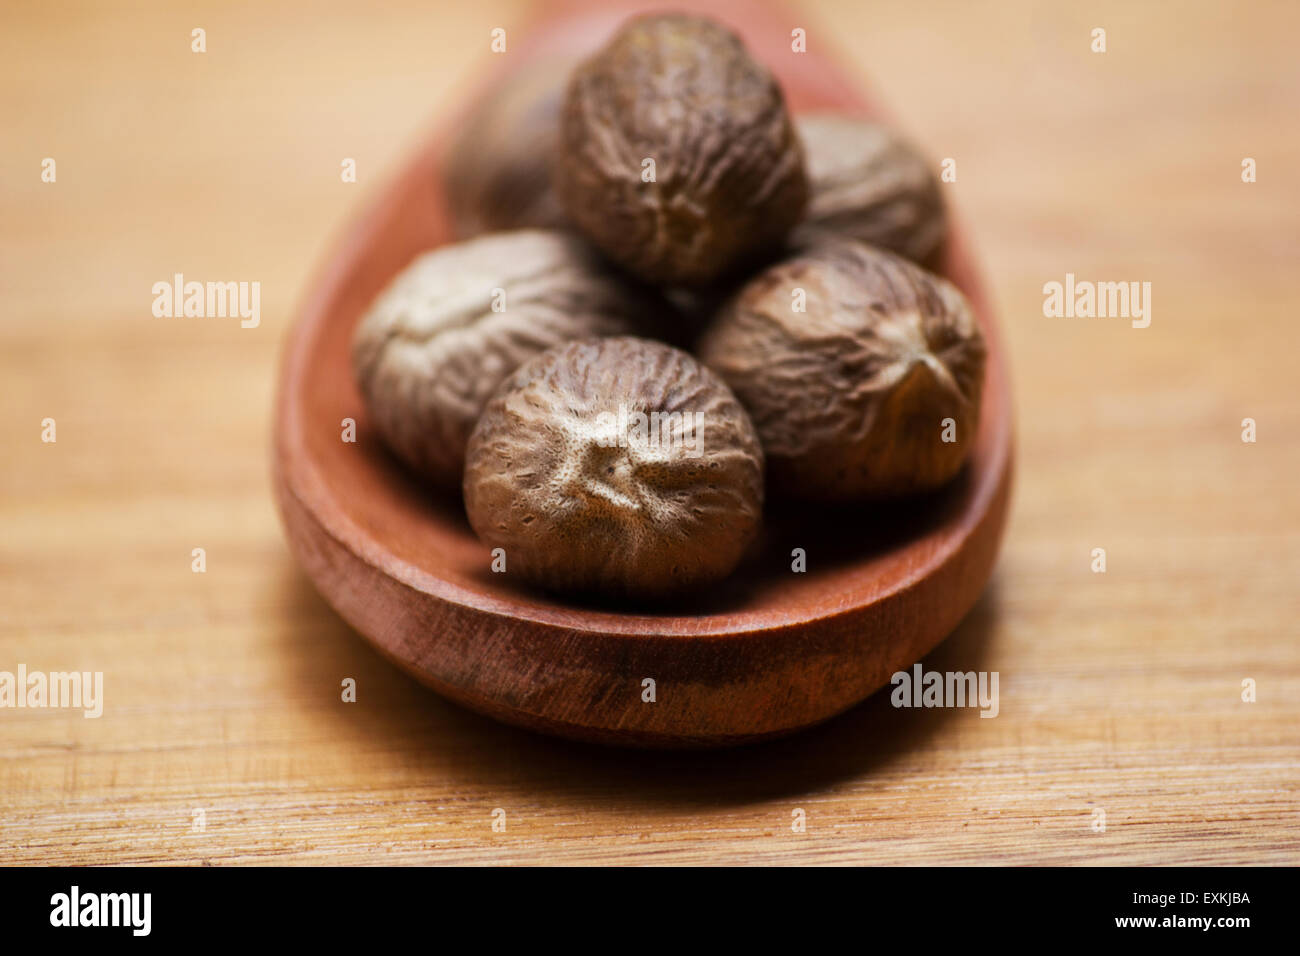 Nutmegs (Myristica fragrans) in a wooden spoon on wooden background Stock Photo